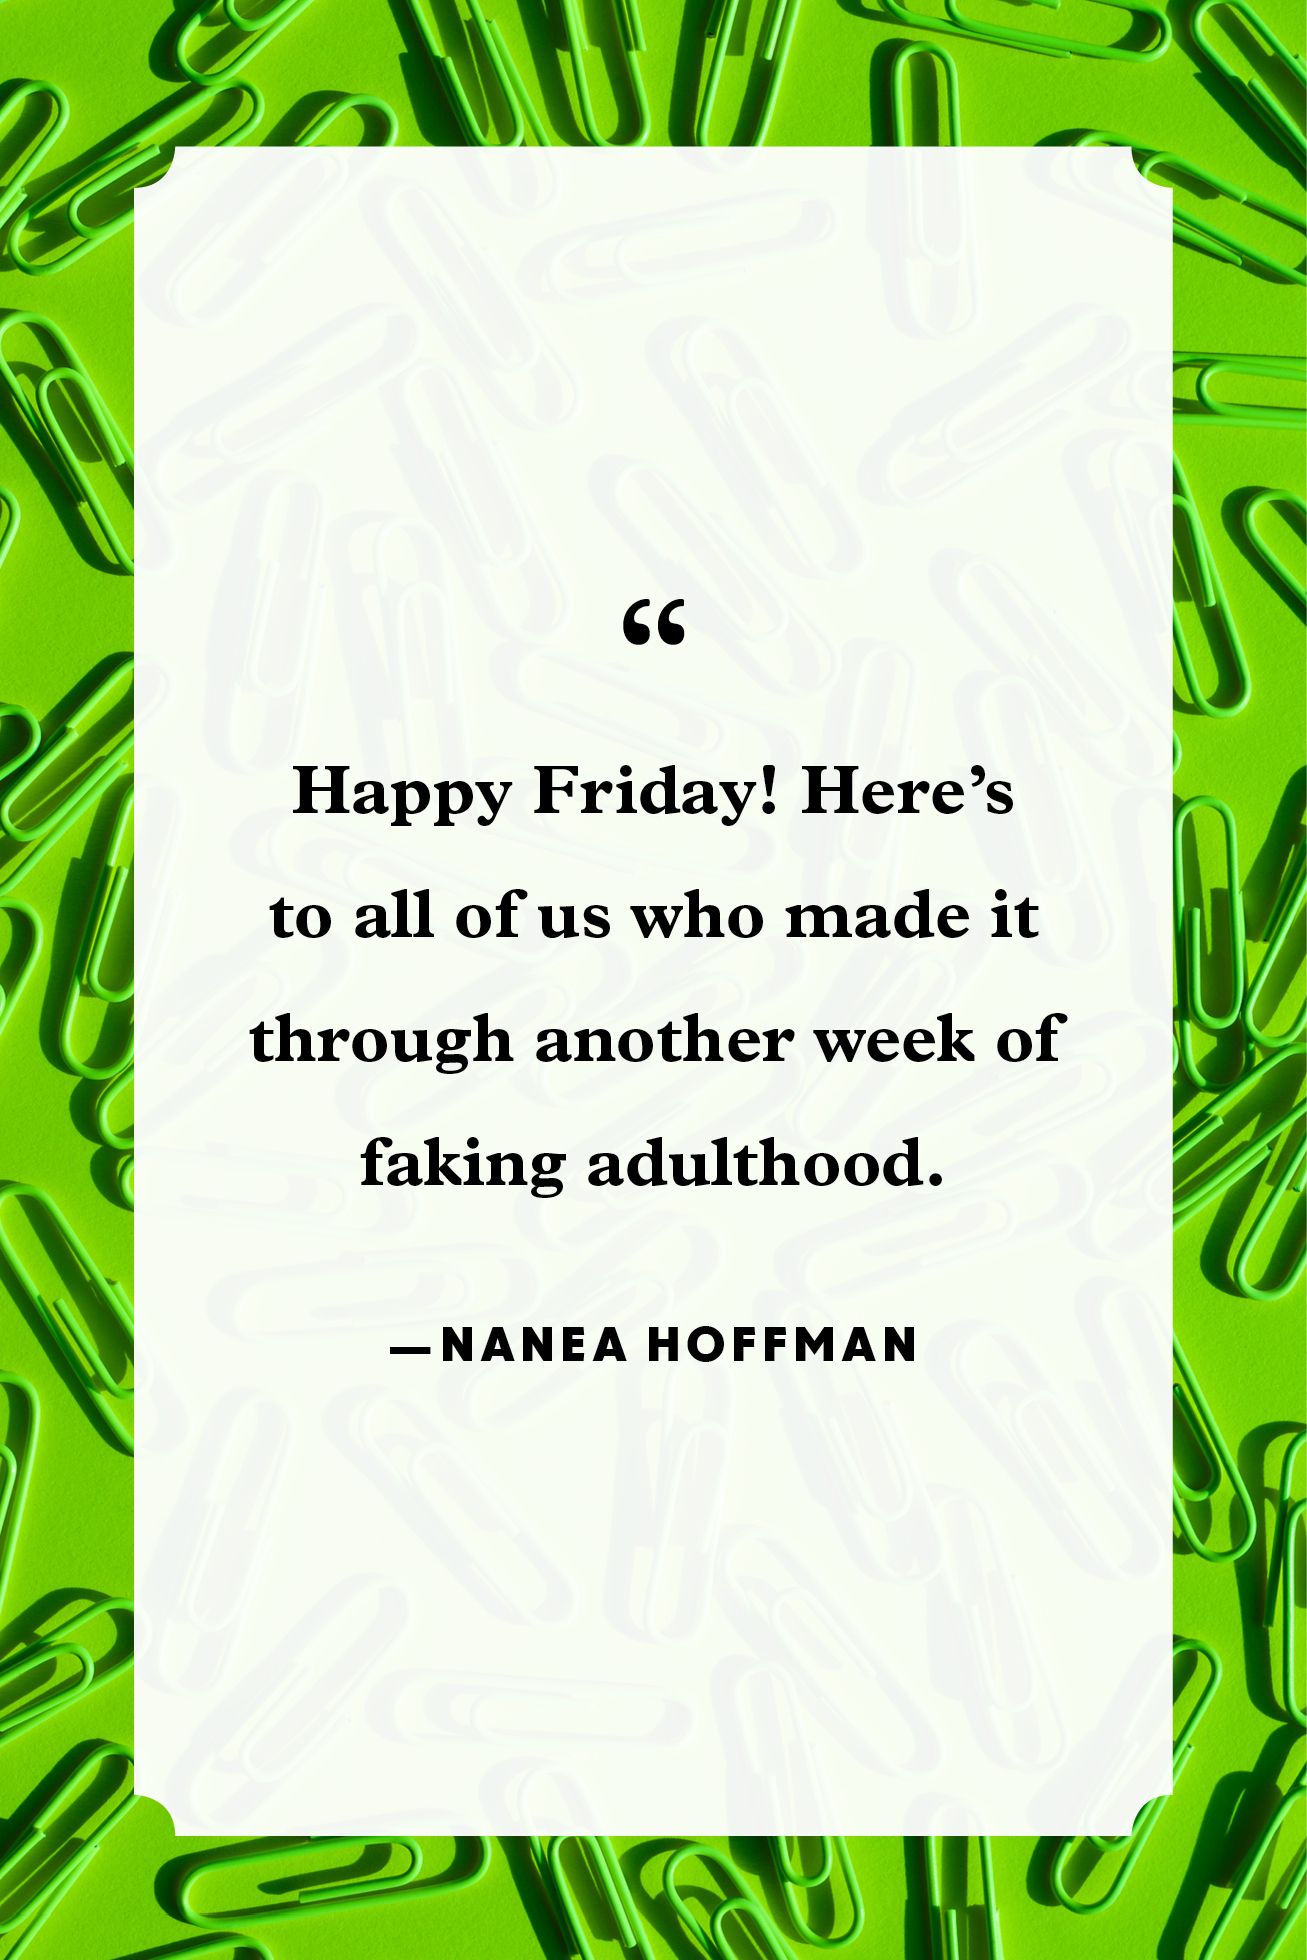 28 Best Friday Quotes - Happy Friday Quotes To Start The Weekend